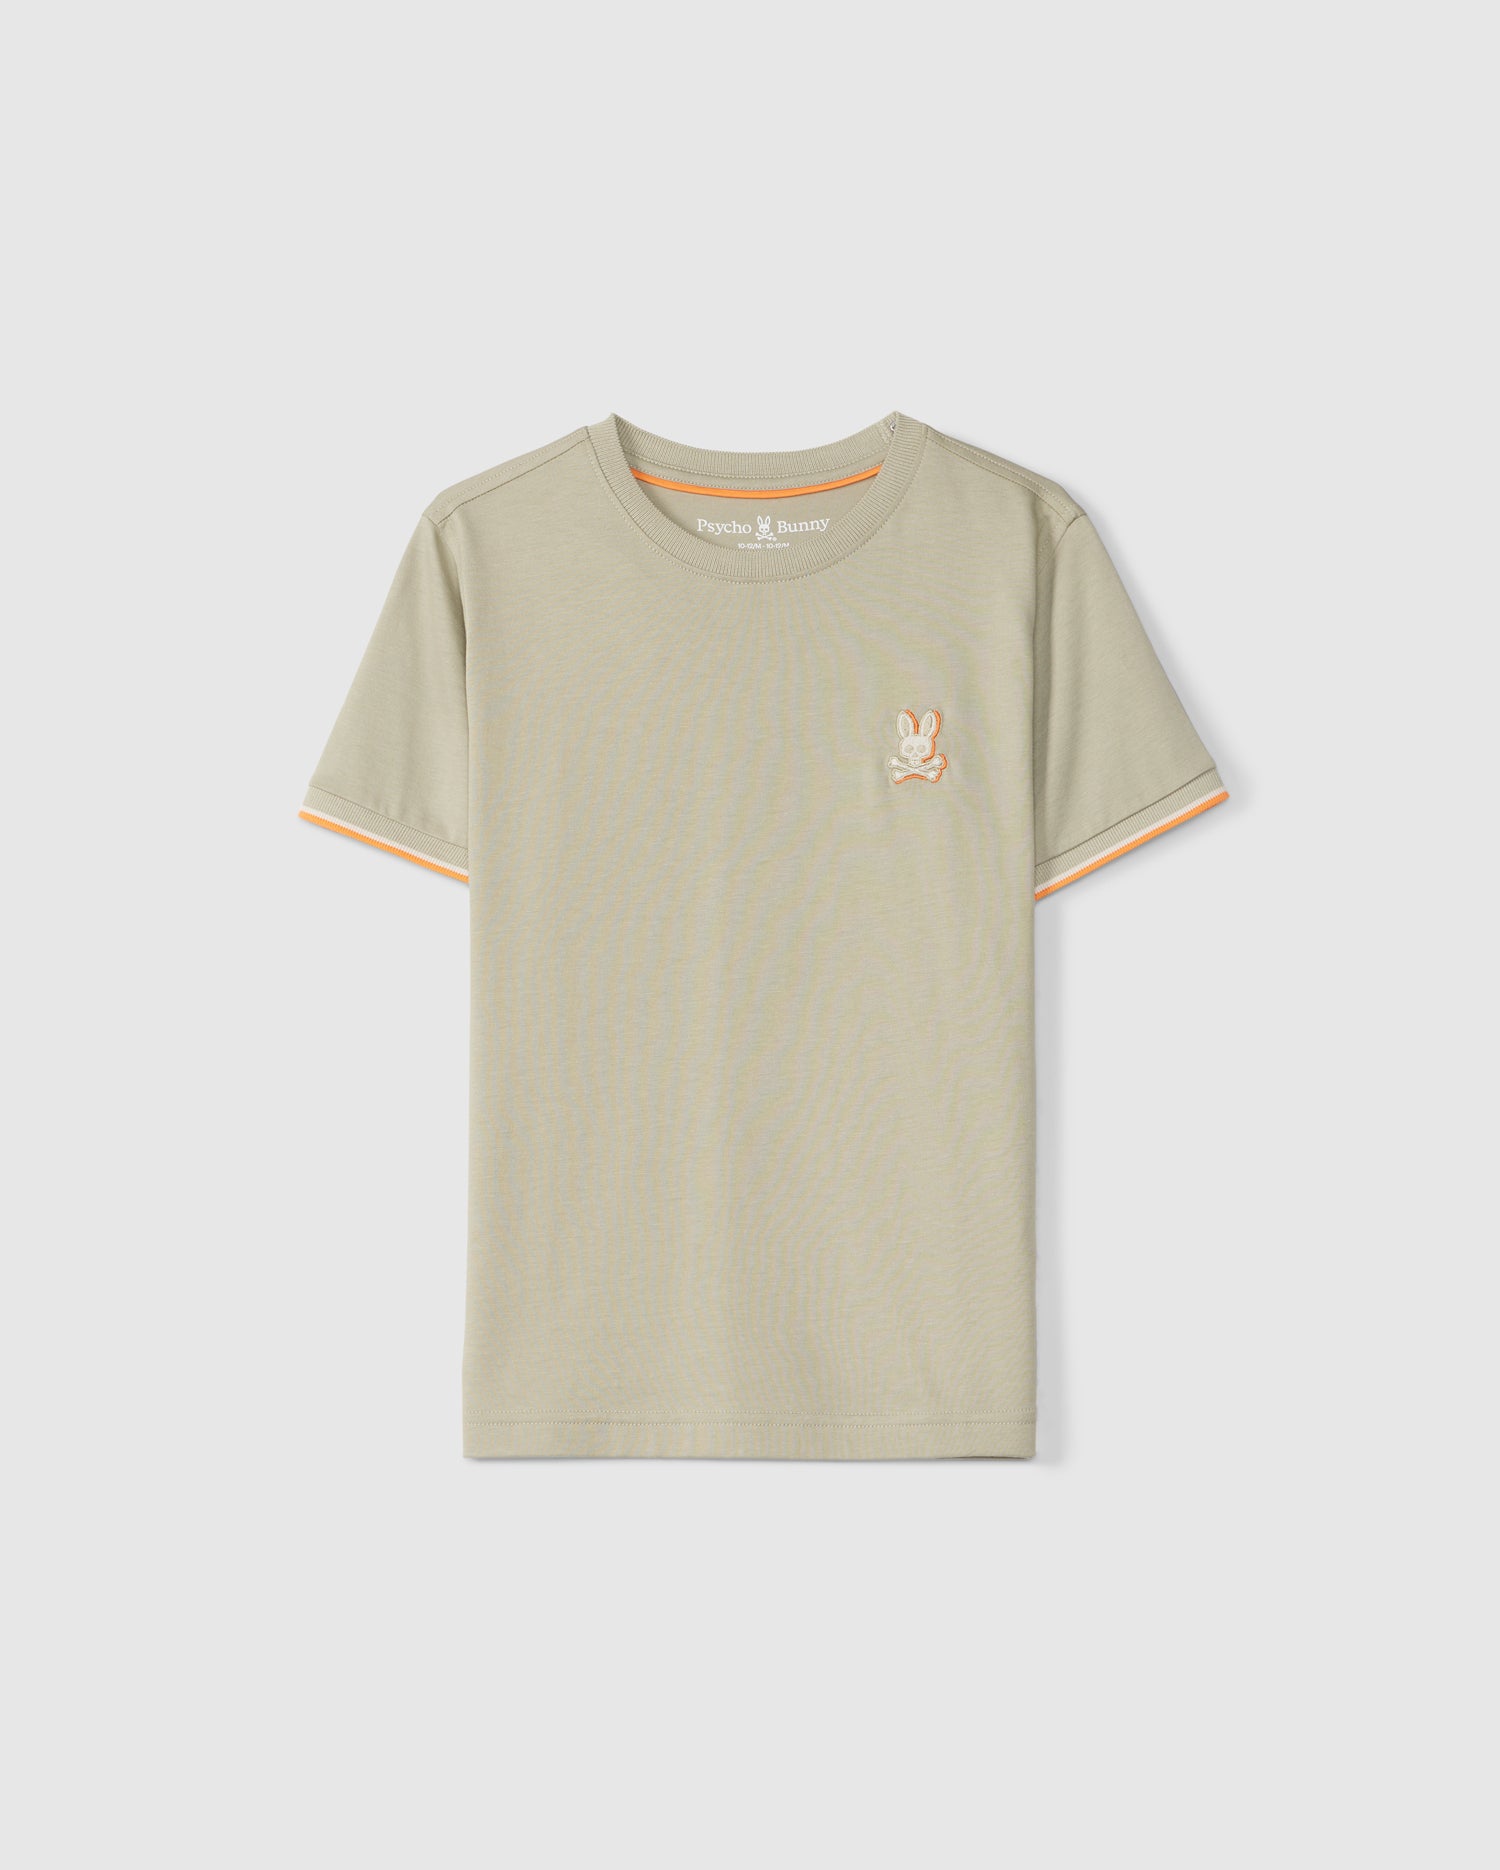 A light beige short-sleeve kids fashion tee made from soft Pima cotton, featuring an embroidered chest bunny logo on the left. The shirt has a round neckline and an orange trim on the inside of the collar, displayed against a plain white background. This is the KIDS KAYDEN FASHION TEE - B0U577C200 by Psycho Bunny.